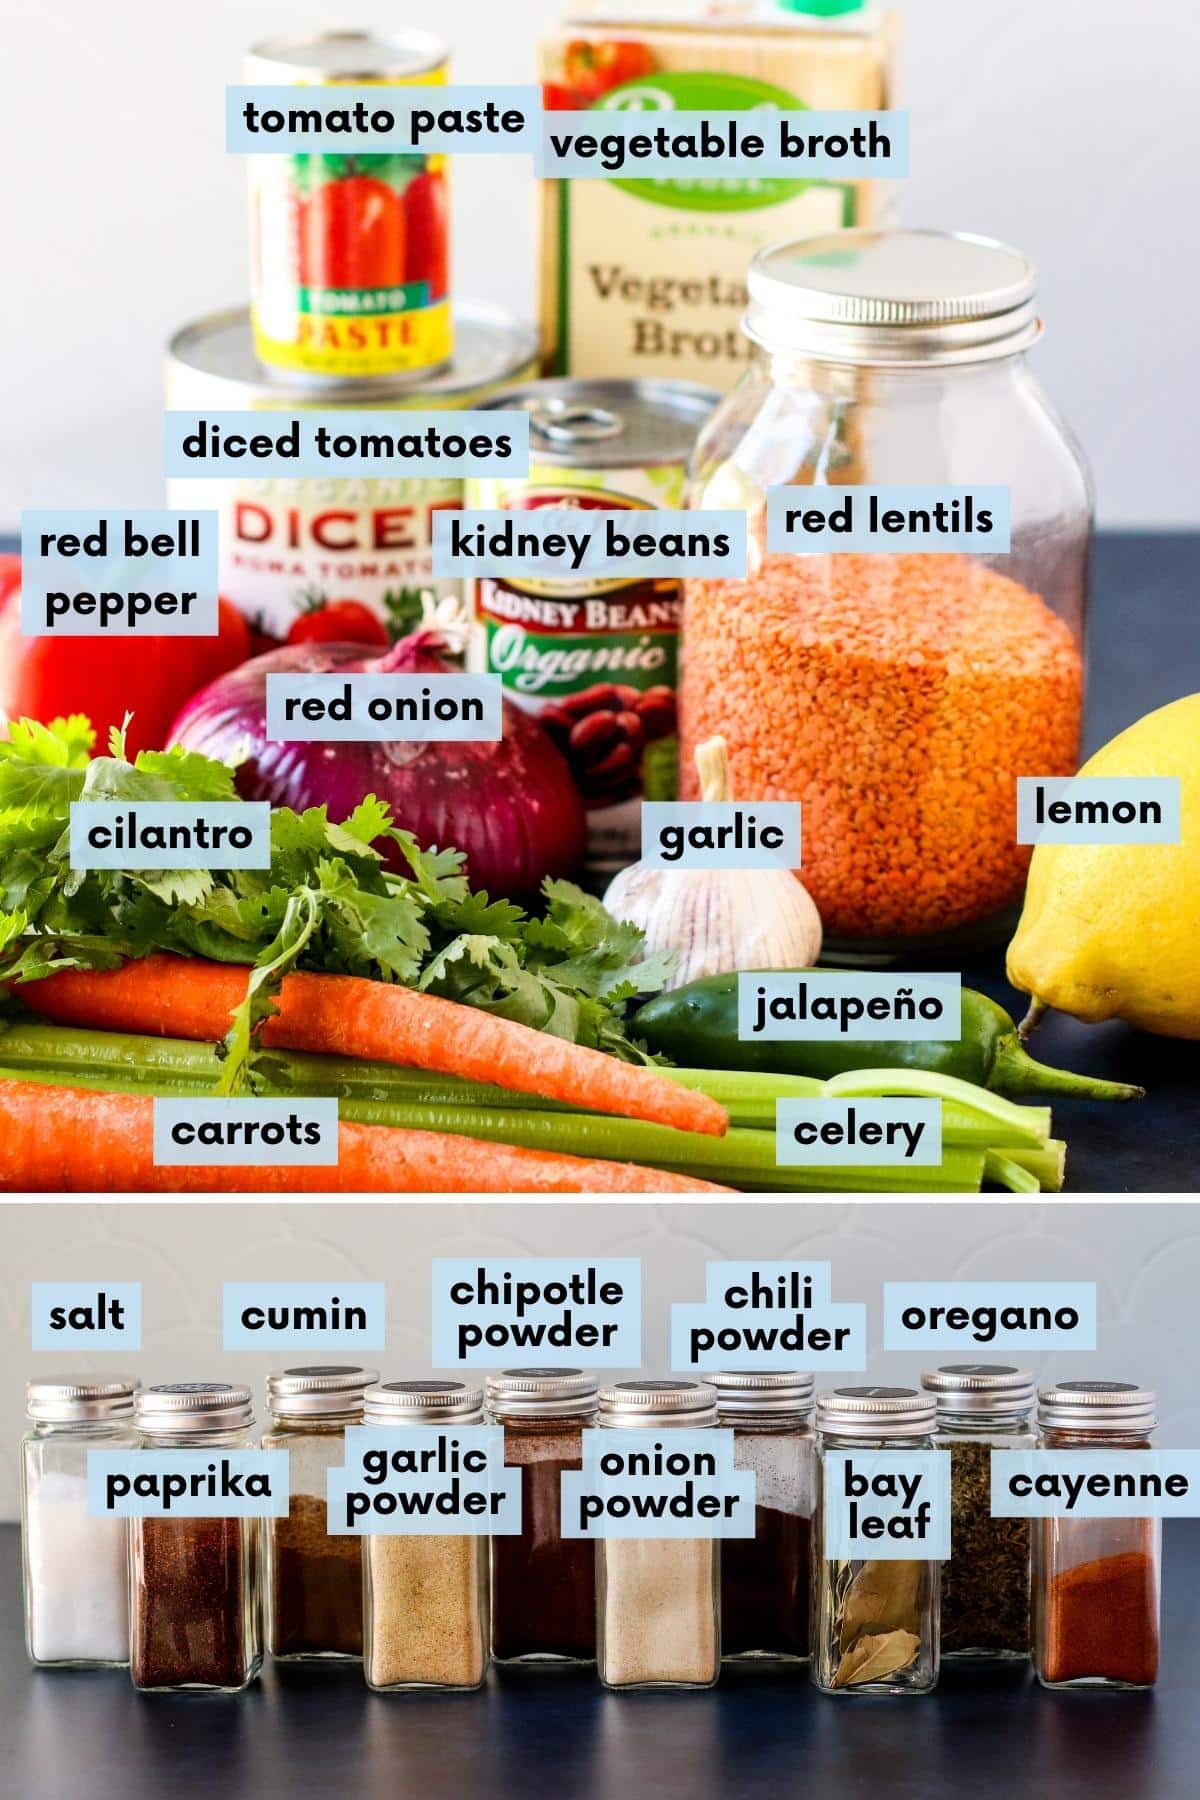 Labeled ingredients needed to make this recipe.